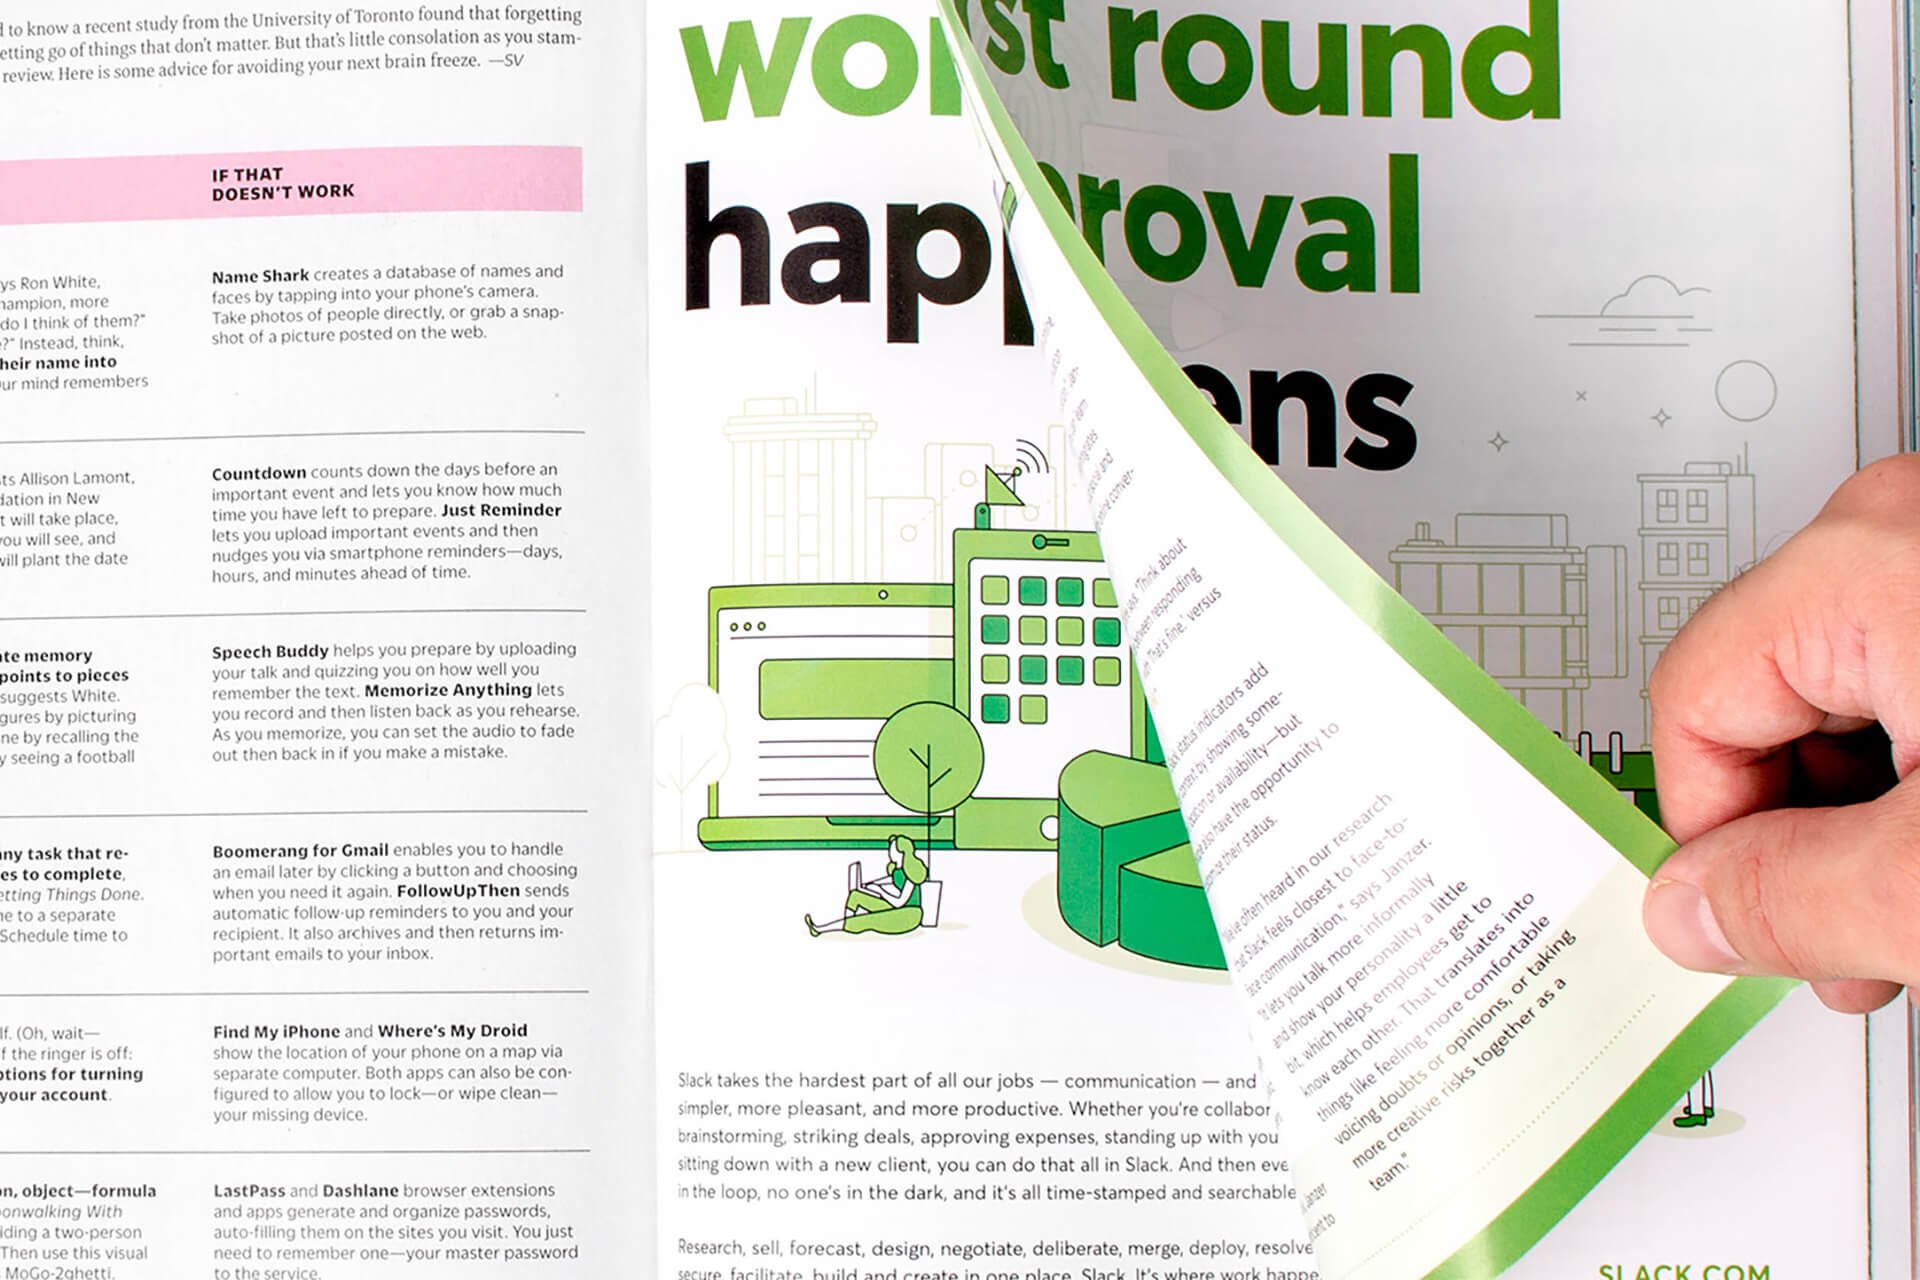 Where Work Happens advertorial gatefold in Fast Company